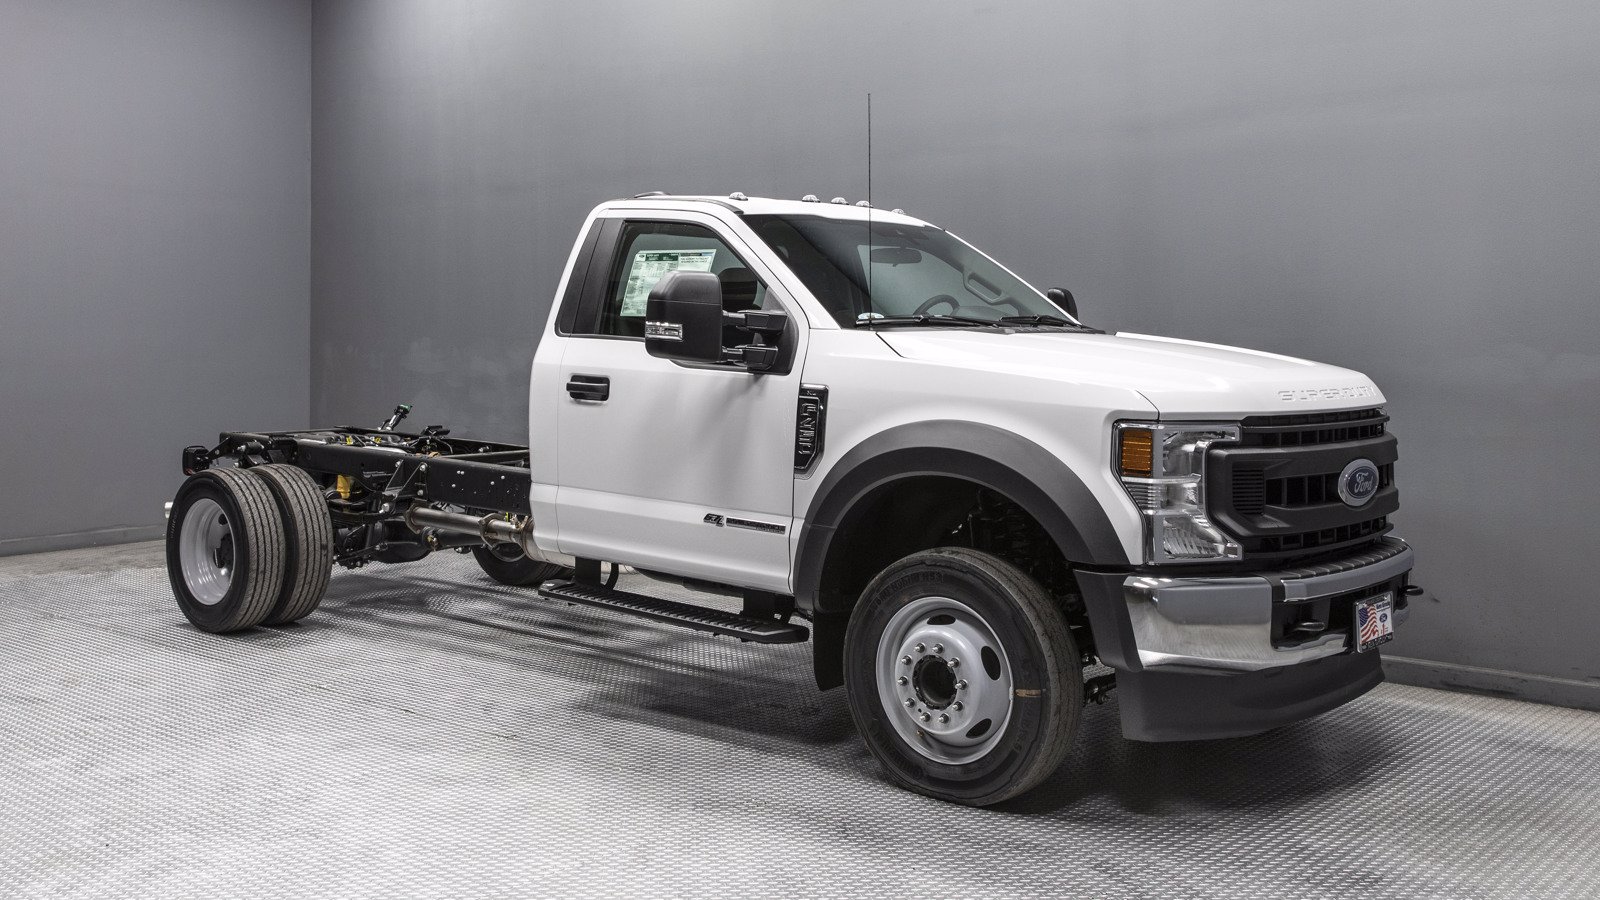 New 2020 Ford Super Duty F450 DRW XL Regular Cab ChassisCab in Buena